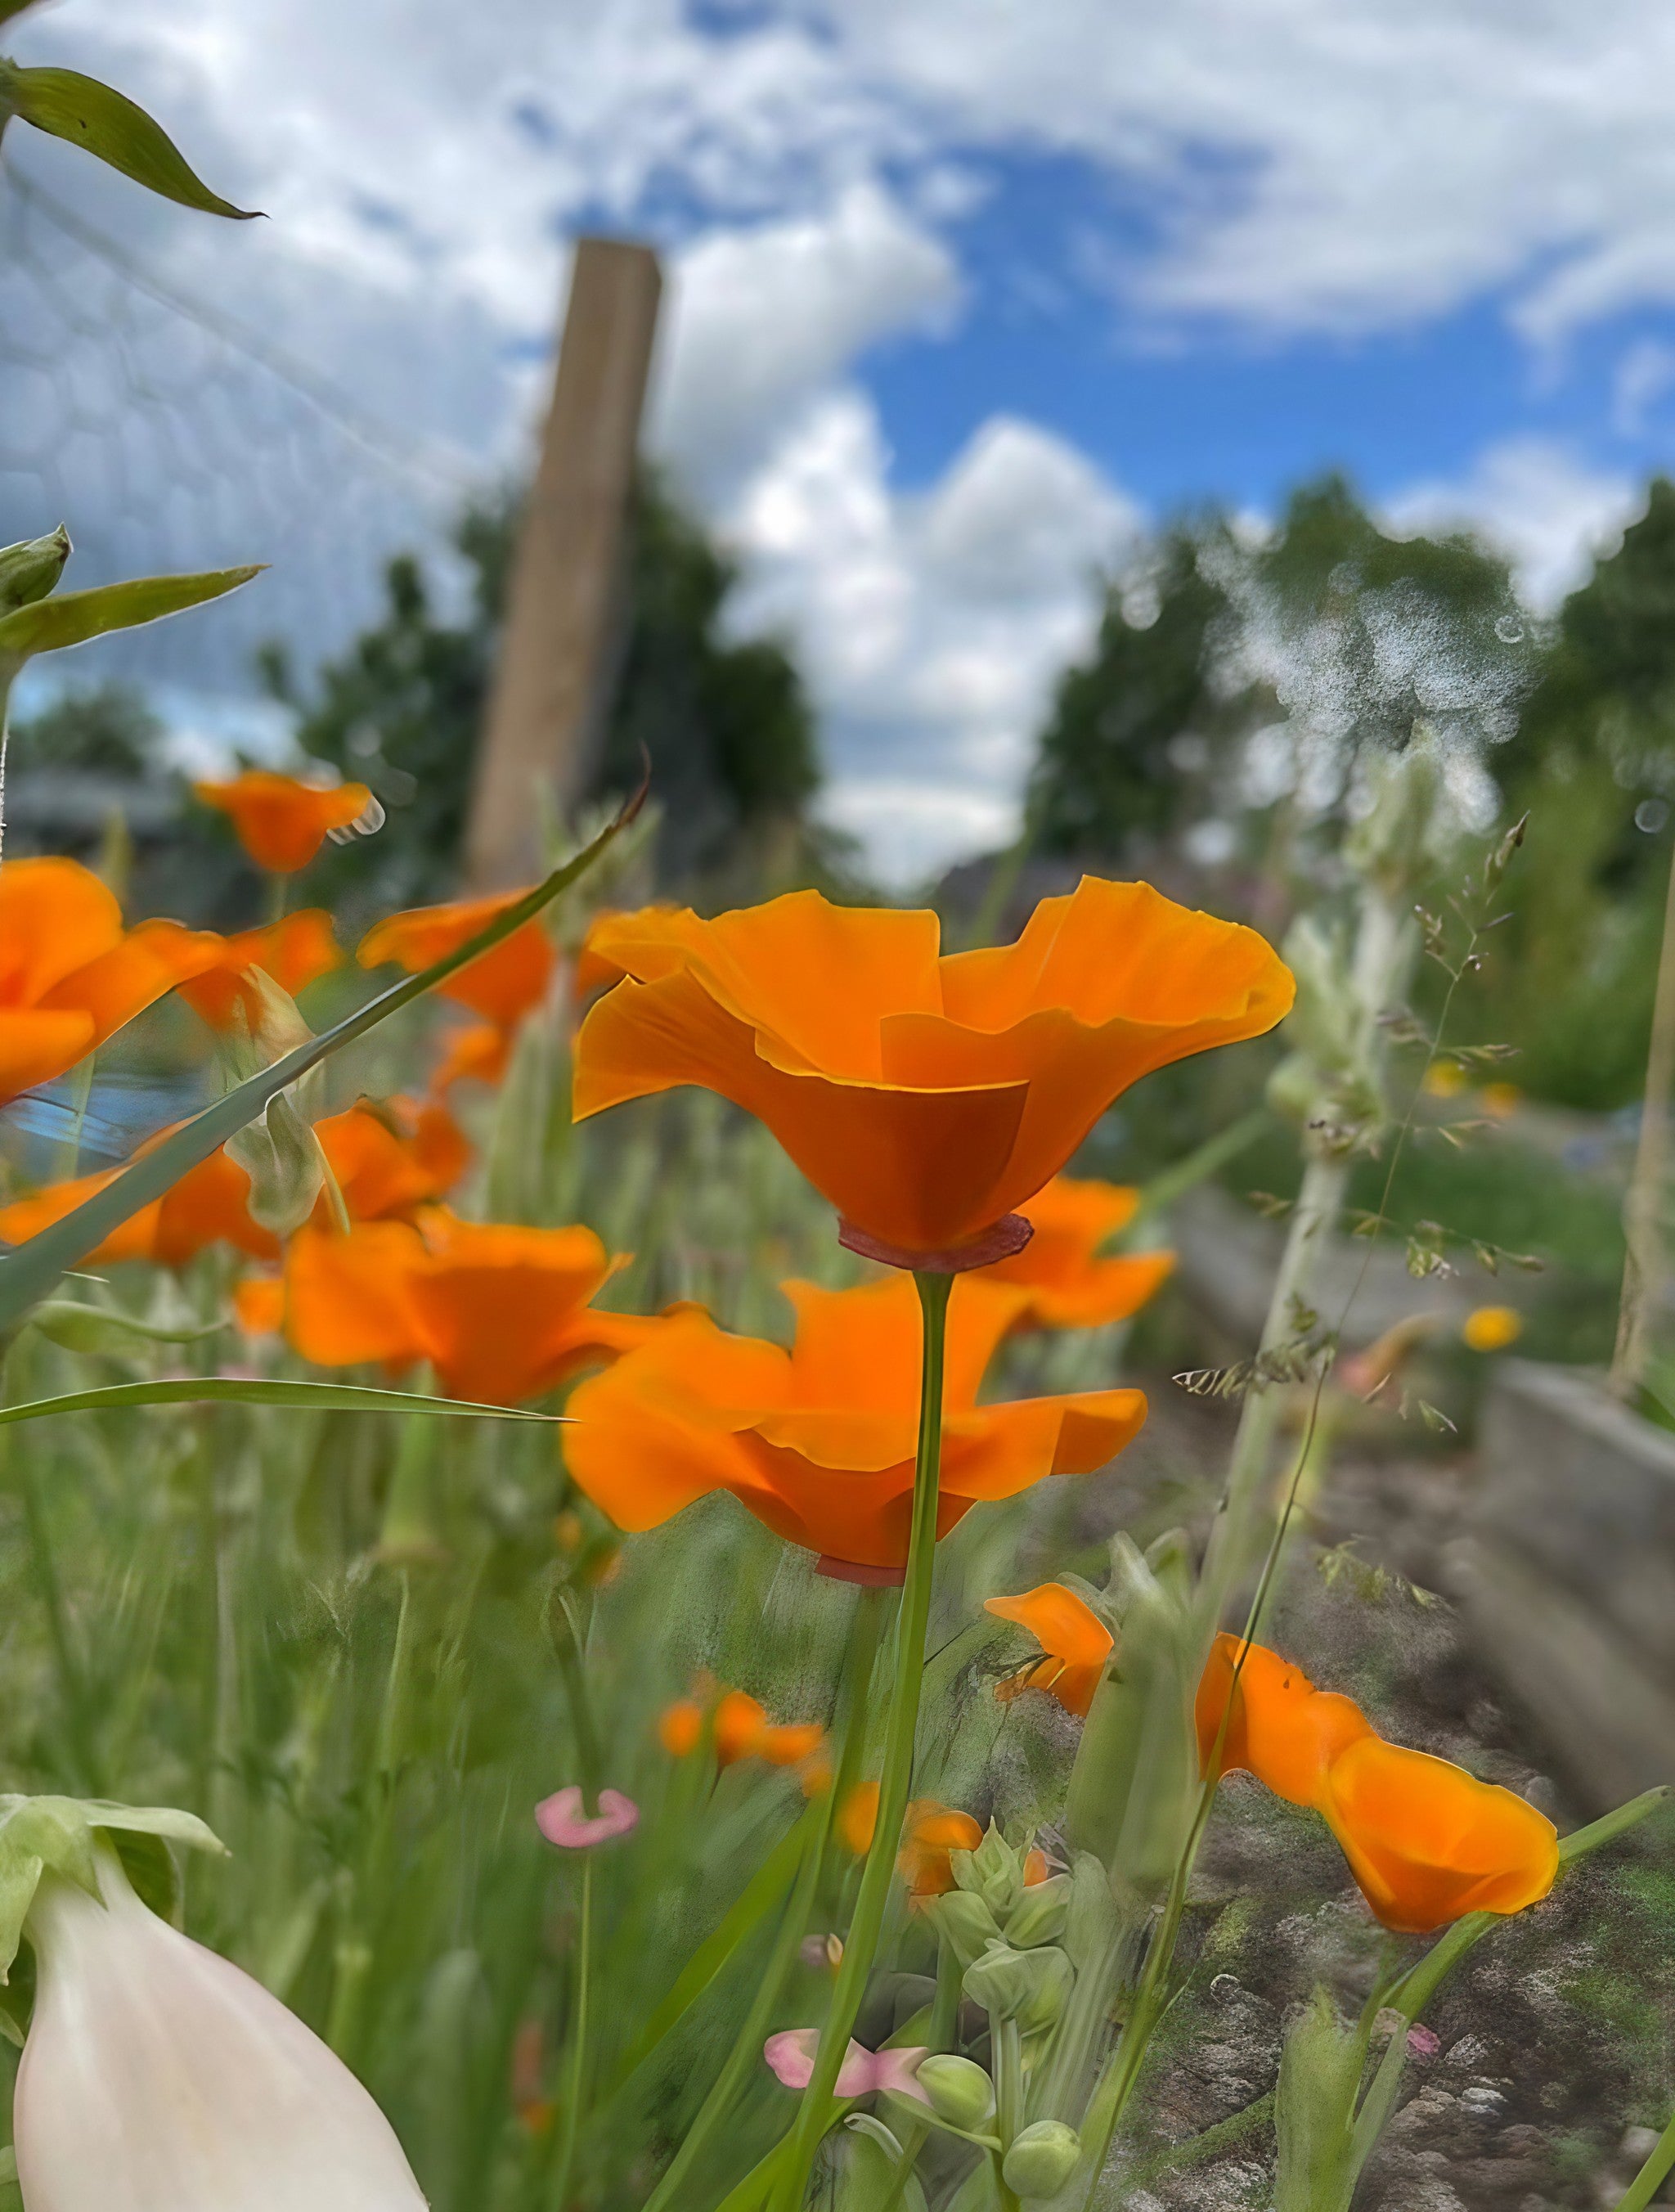 Cluster of Golden West California poppies in a lush garden setting